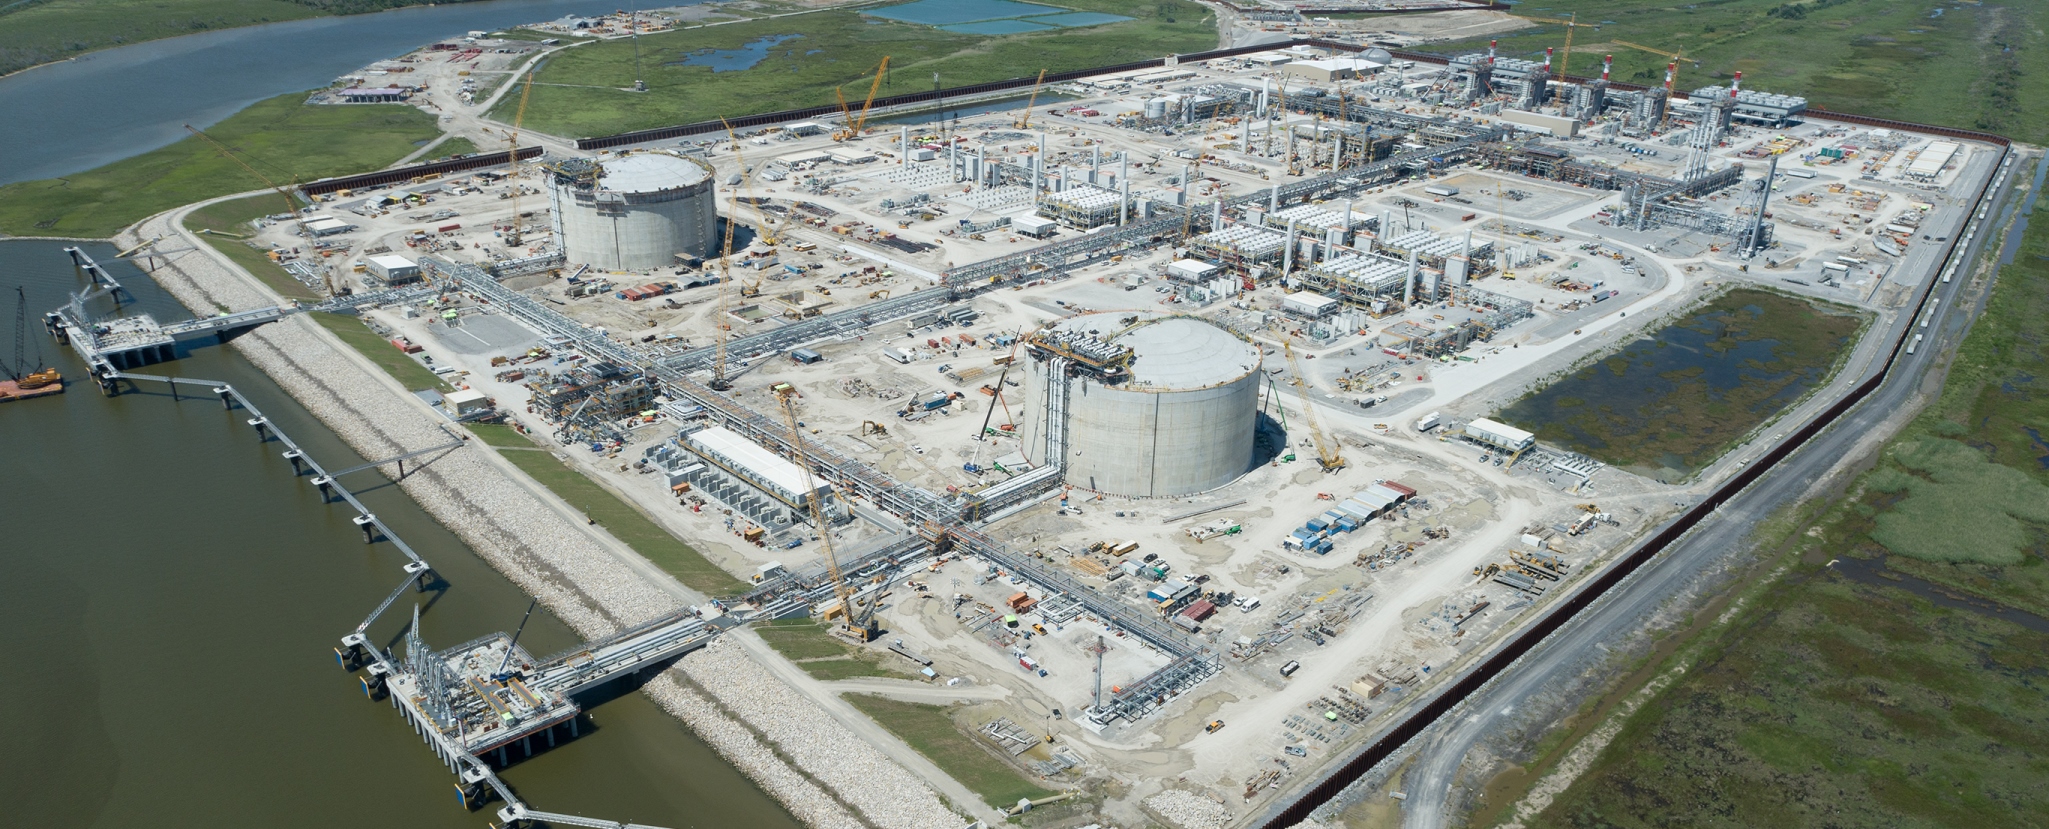 Venture Global LNG wins approval to commission second block at Calcasieu Pass